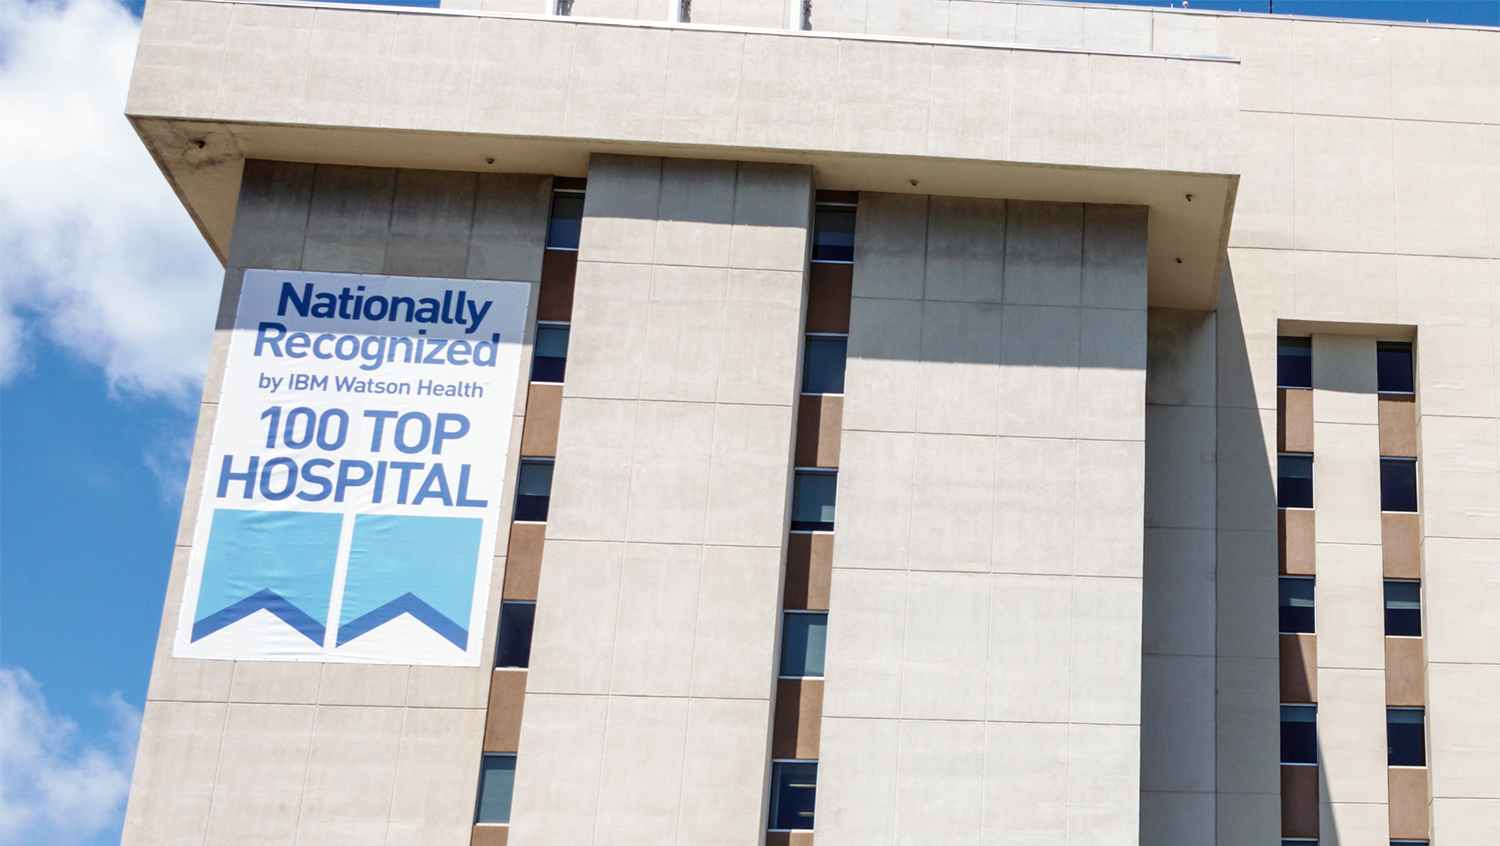 top 100 hospital rankings poster on hospital exterior